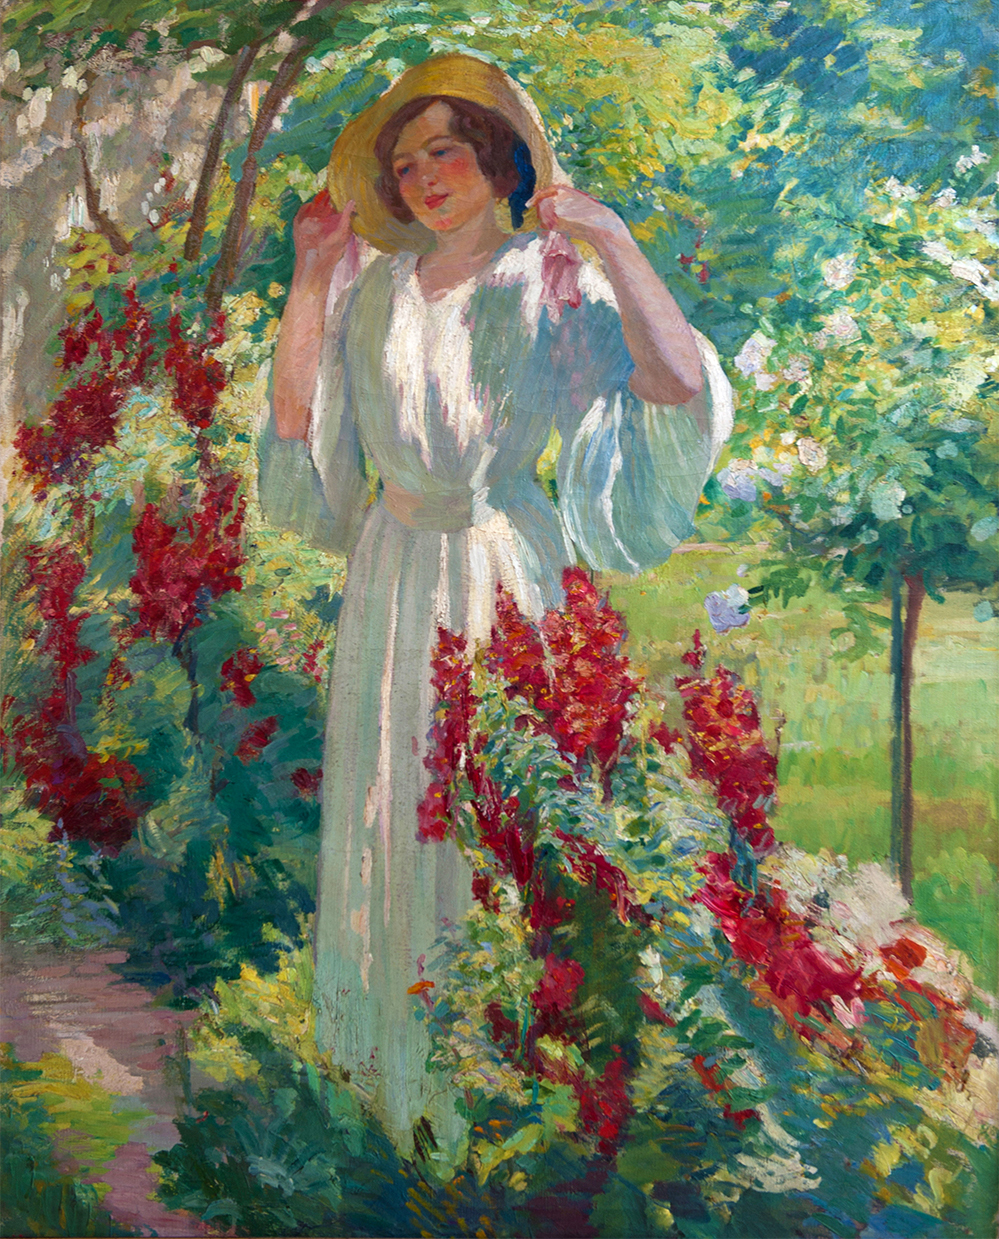 Portrait of a woman standing in a straw hat in a lush garden.